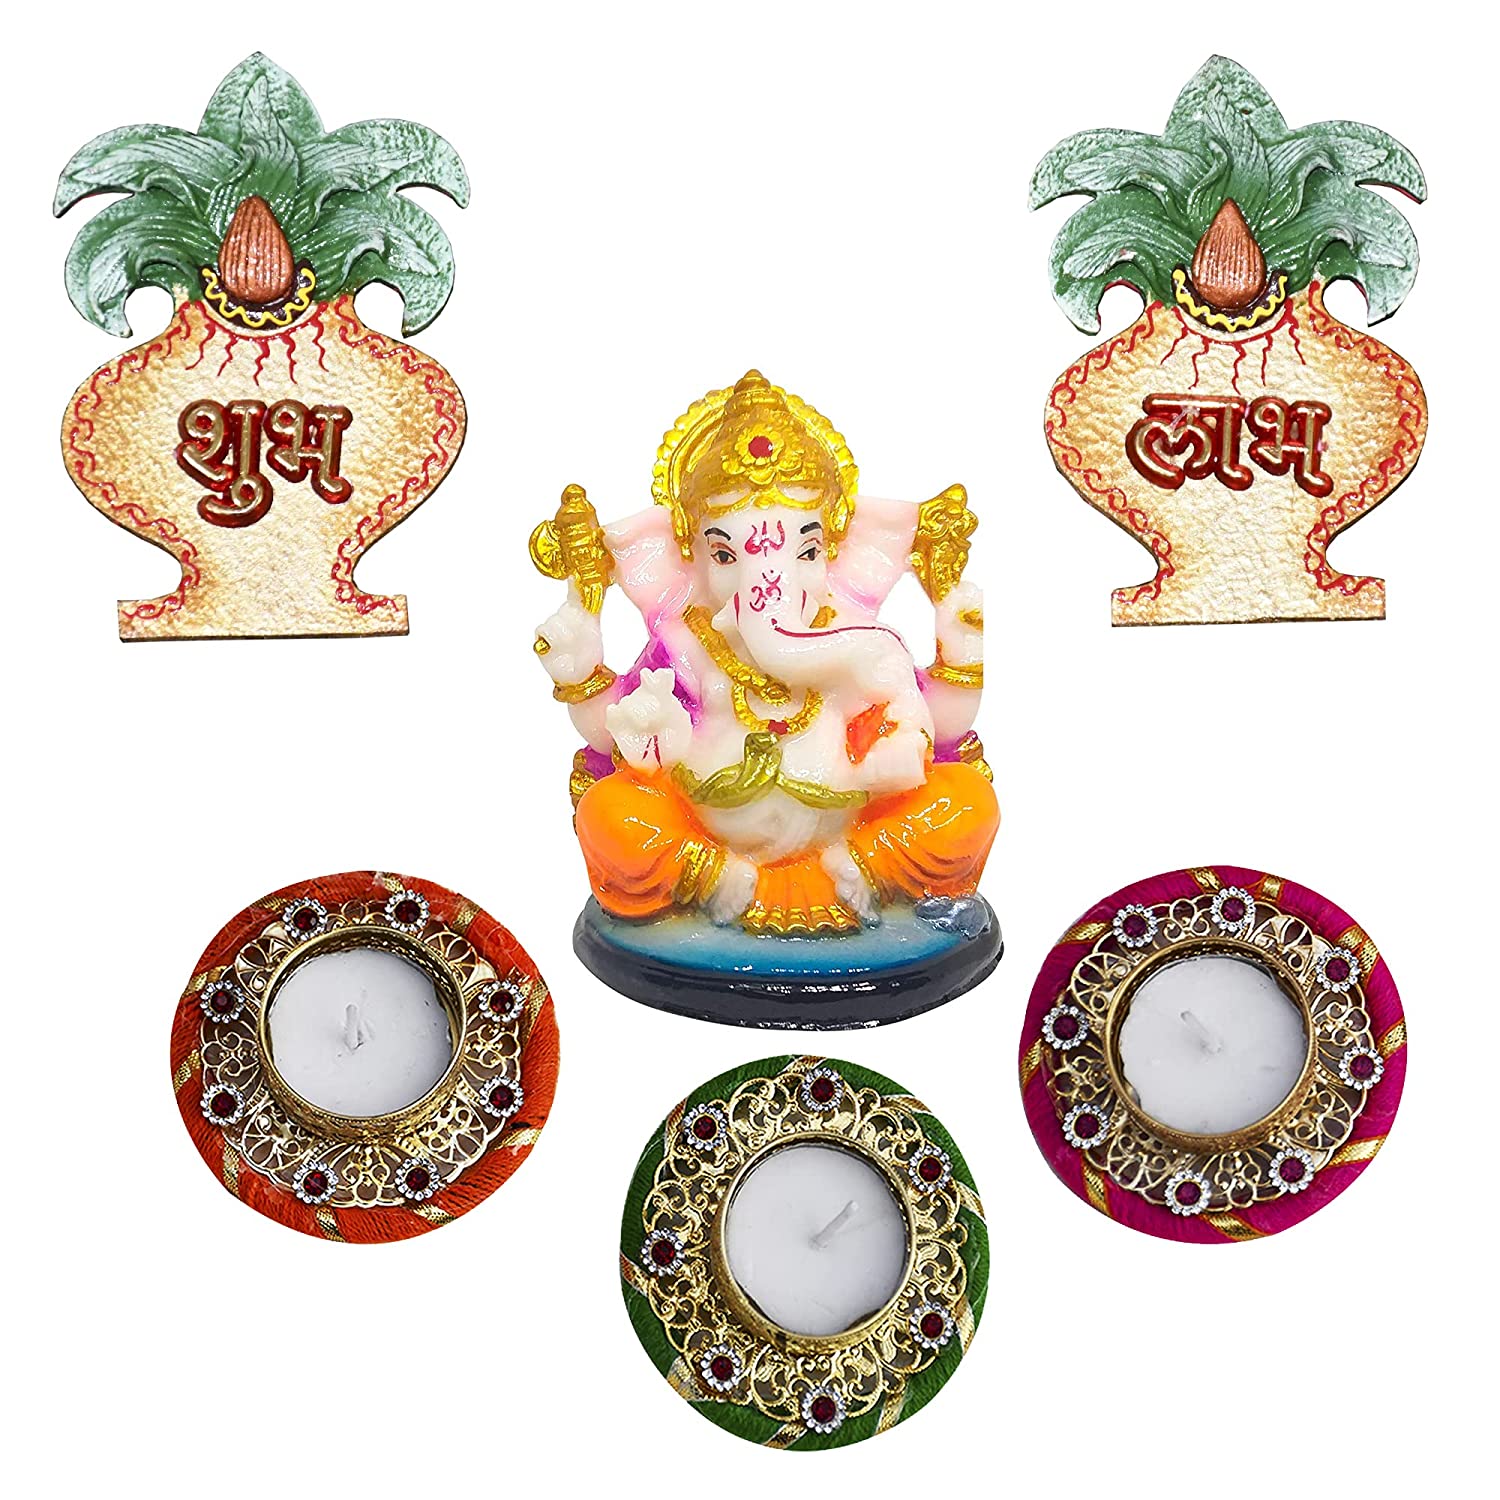 Ganesh Ji Statue With Shubh Labh And Candles Combo Offer 1508